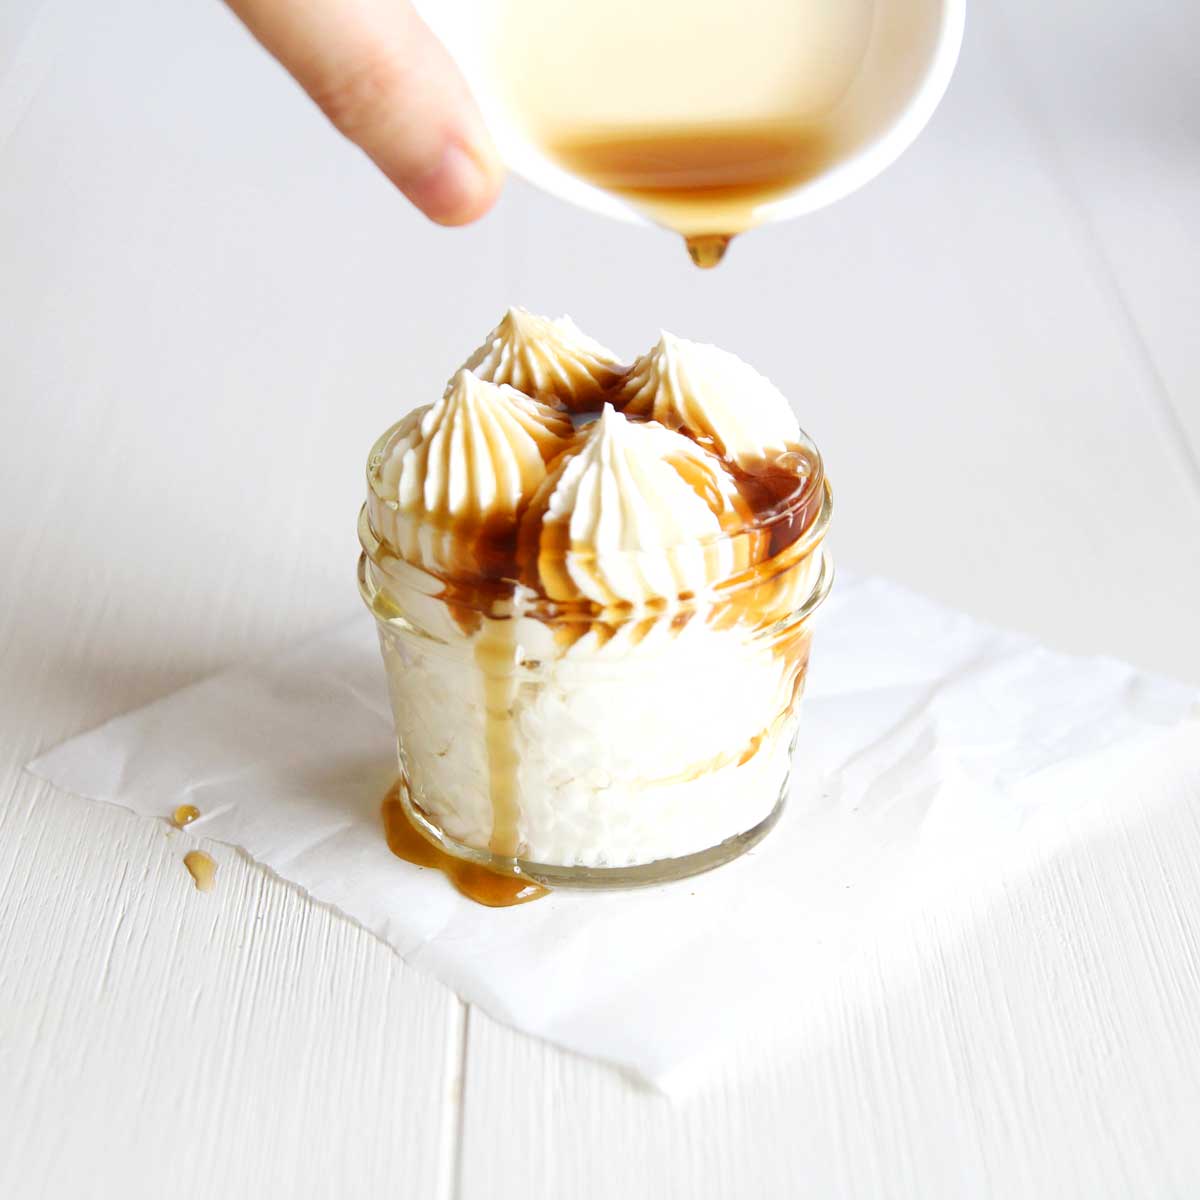 Homemade Maple Whipped Cream that Stays Picture-Perfect for Hours - Whipped Cream Recipes